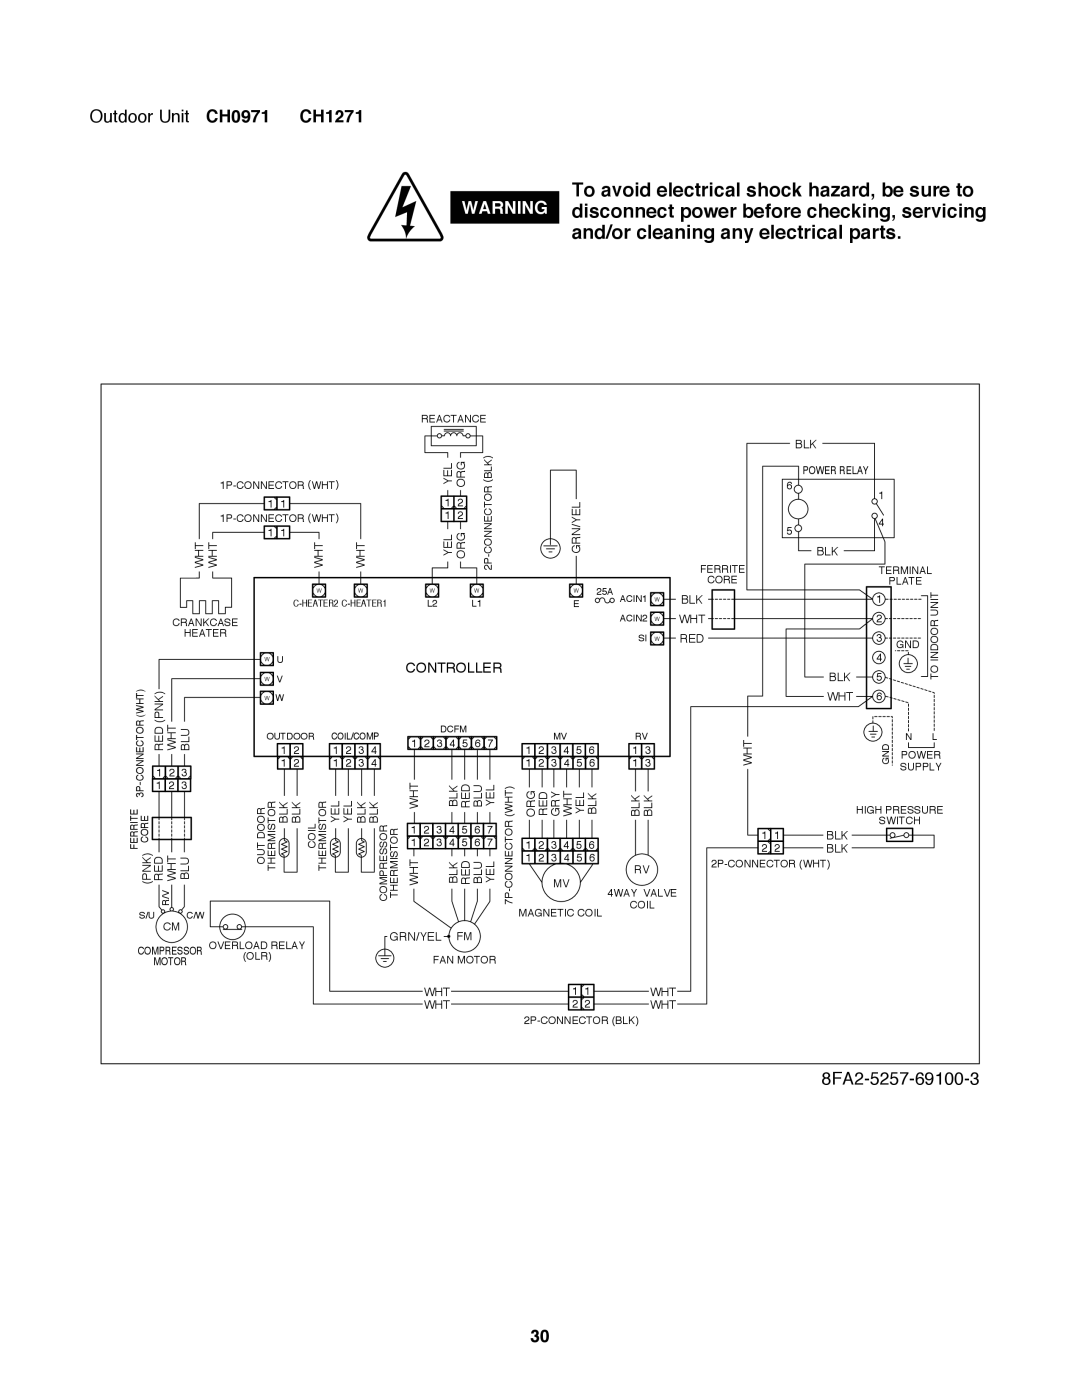 Sanyo service manual and/or cleaning any electrical parts, Outdoor Unit CH0971 CH1271 